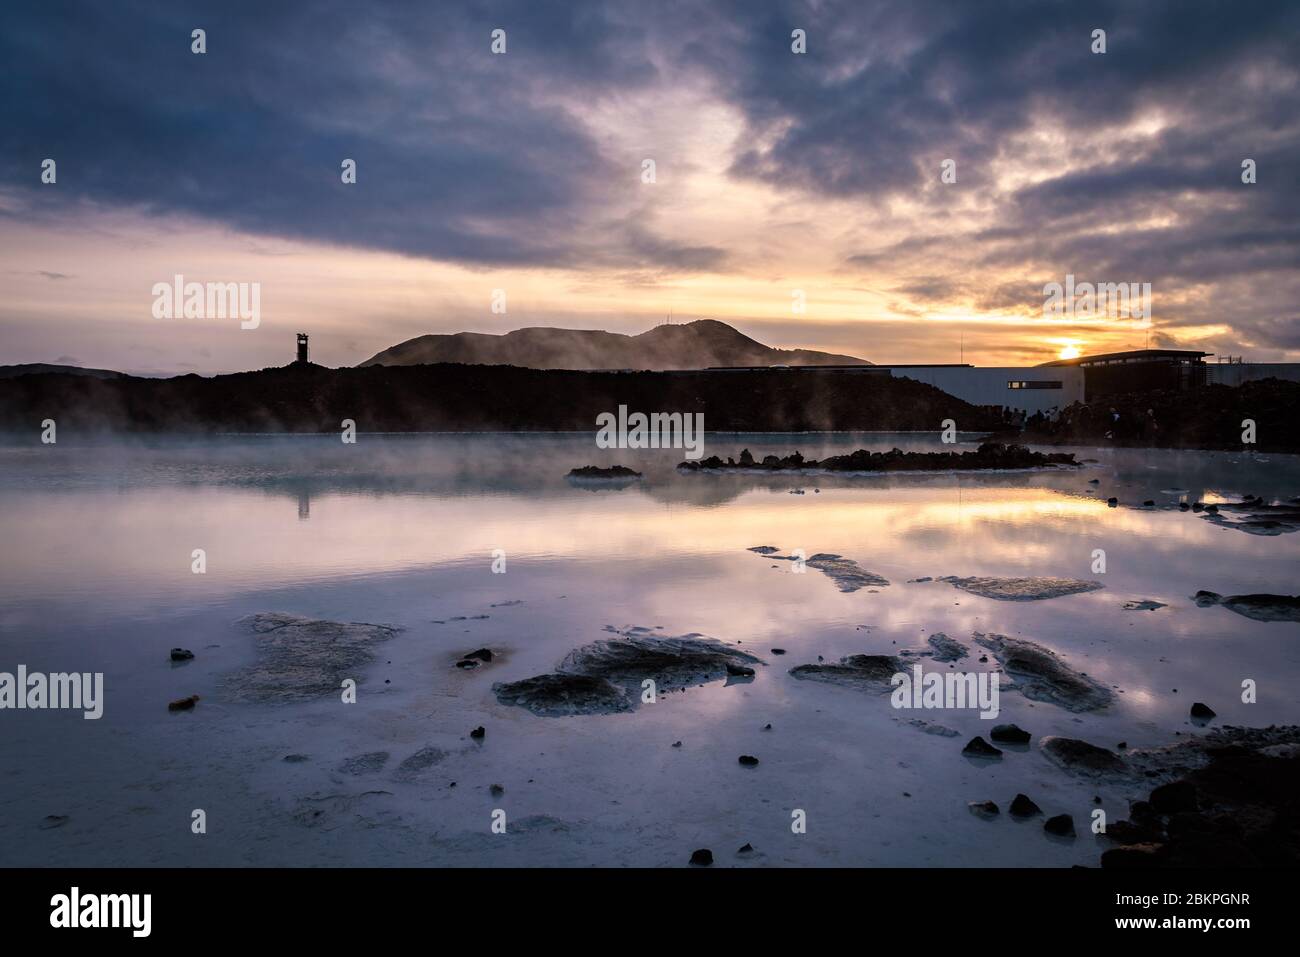 Blue Lagoon (Bláa lónið), geothermal spa attraction located in a lava field in Grindavík on the Reykjanes Peninsula, Iceland. Stock Photo